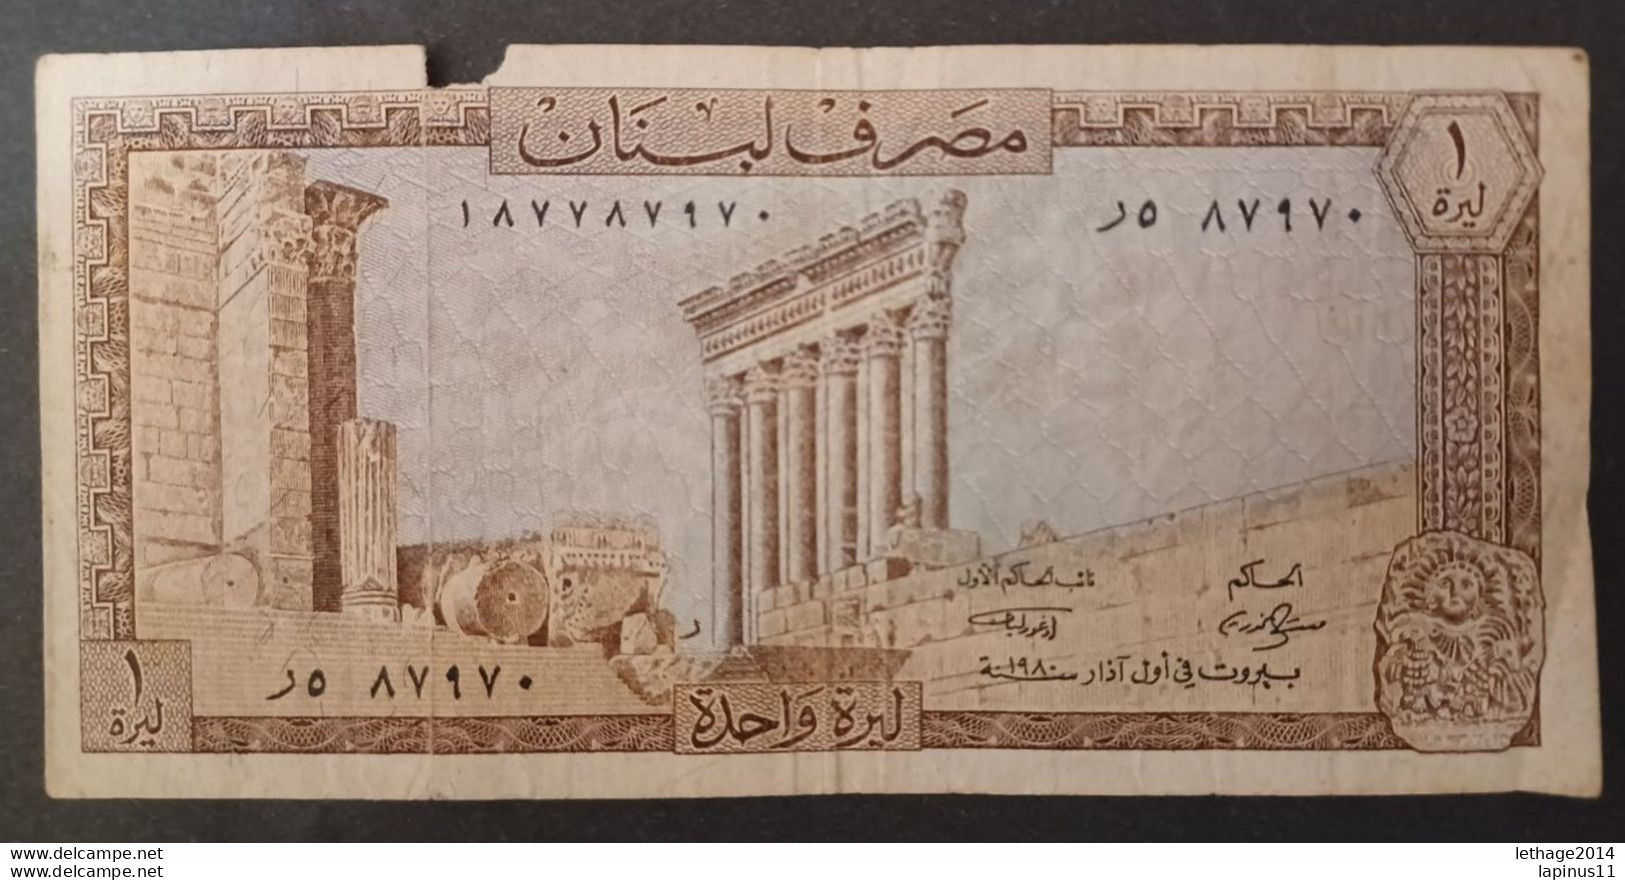 BANKNOTE LEBANON لبنان LIBAN 1978 5 LIVRES NOT CIRCULATED